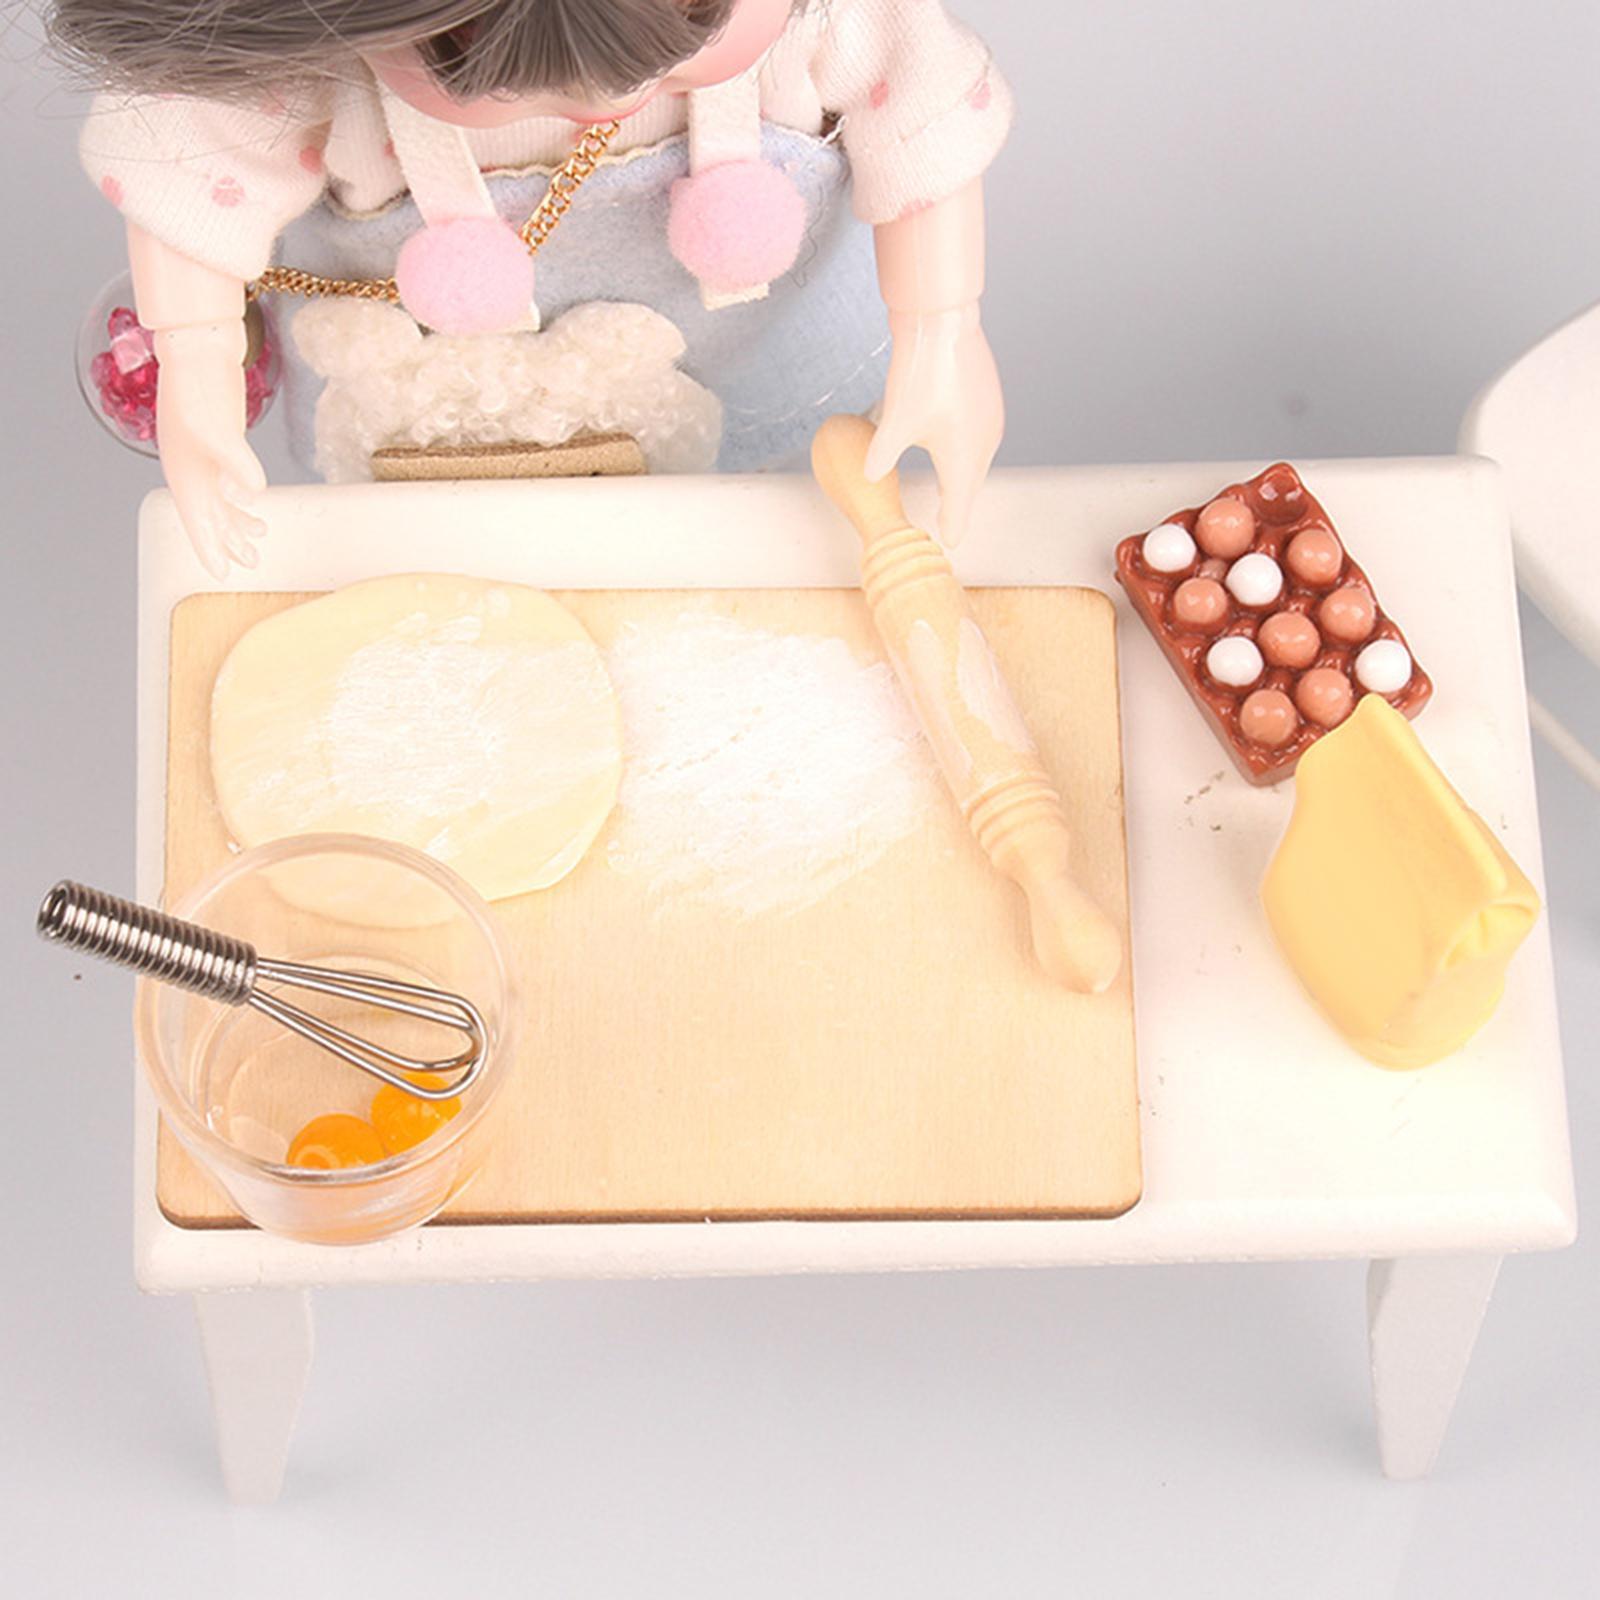 1:12 Miniature Dollhouse Baking Set 1/12 Bread Making Set Tiny Foods Photo Props 1/12 Miniature Baking Cooking Set for Home Kitchen Bakery